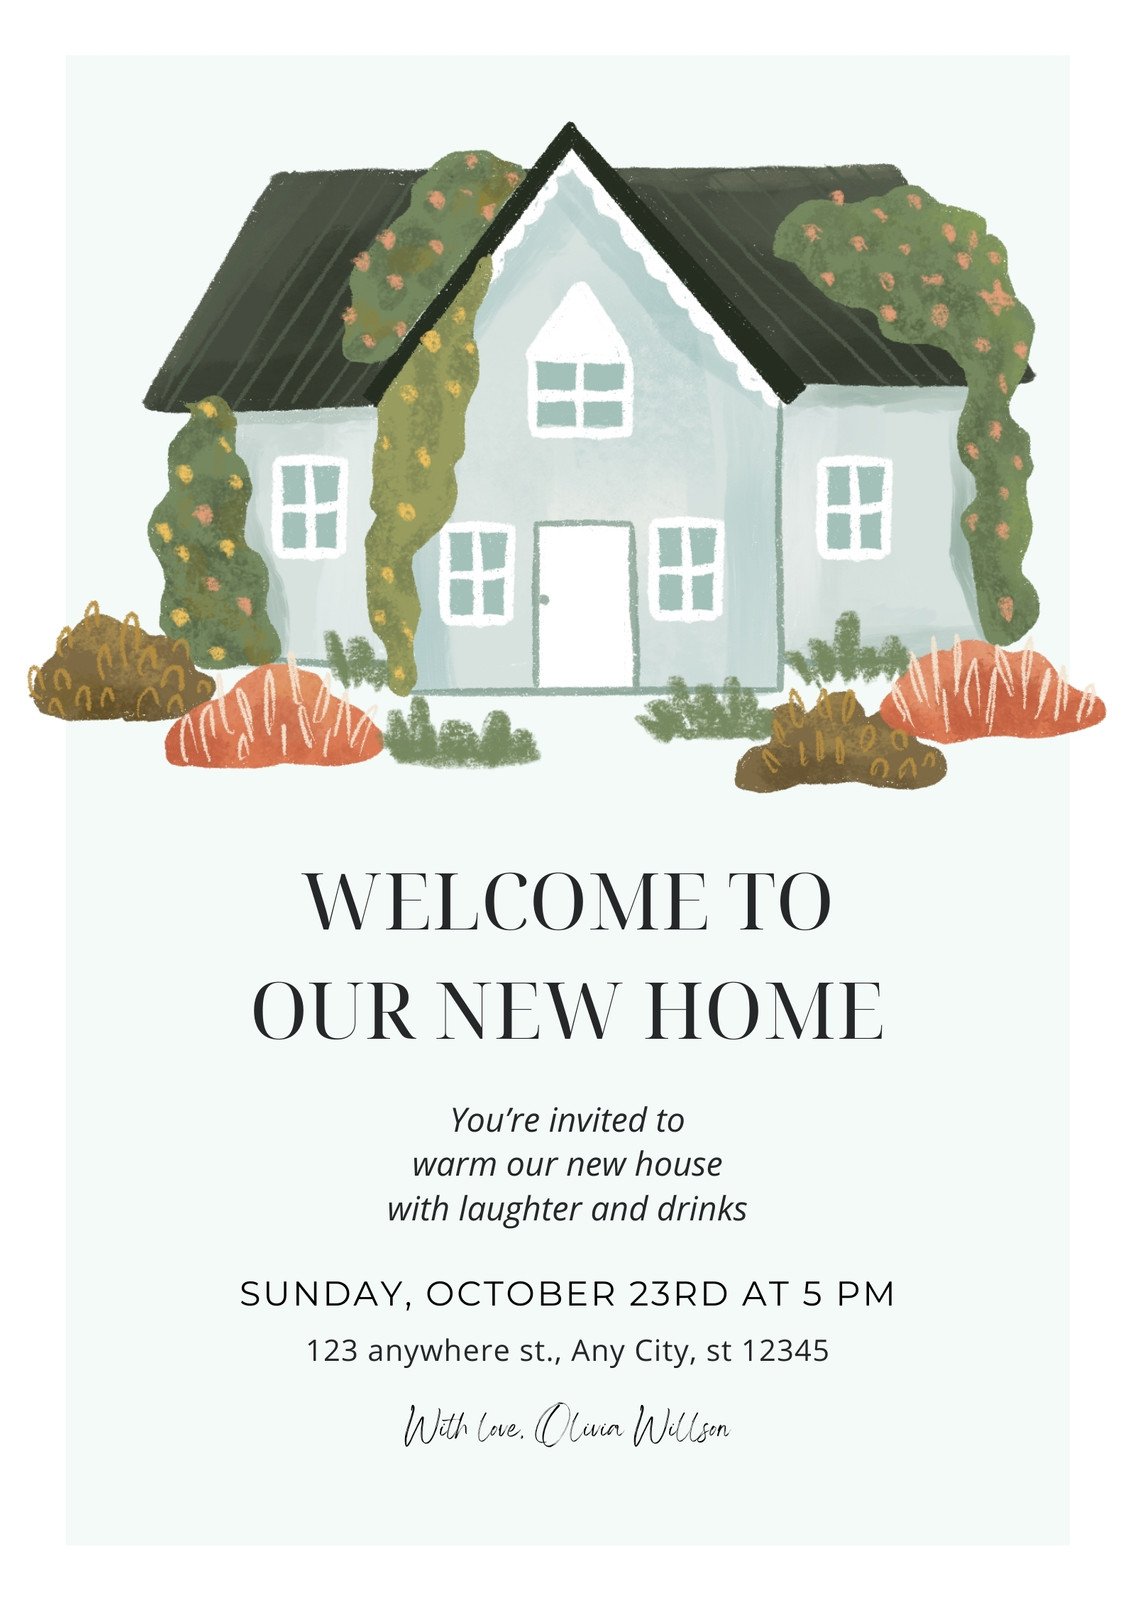 Invite to housewarming party